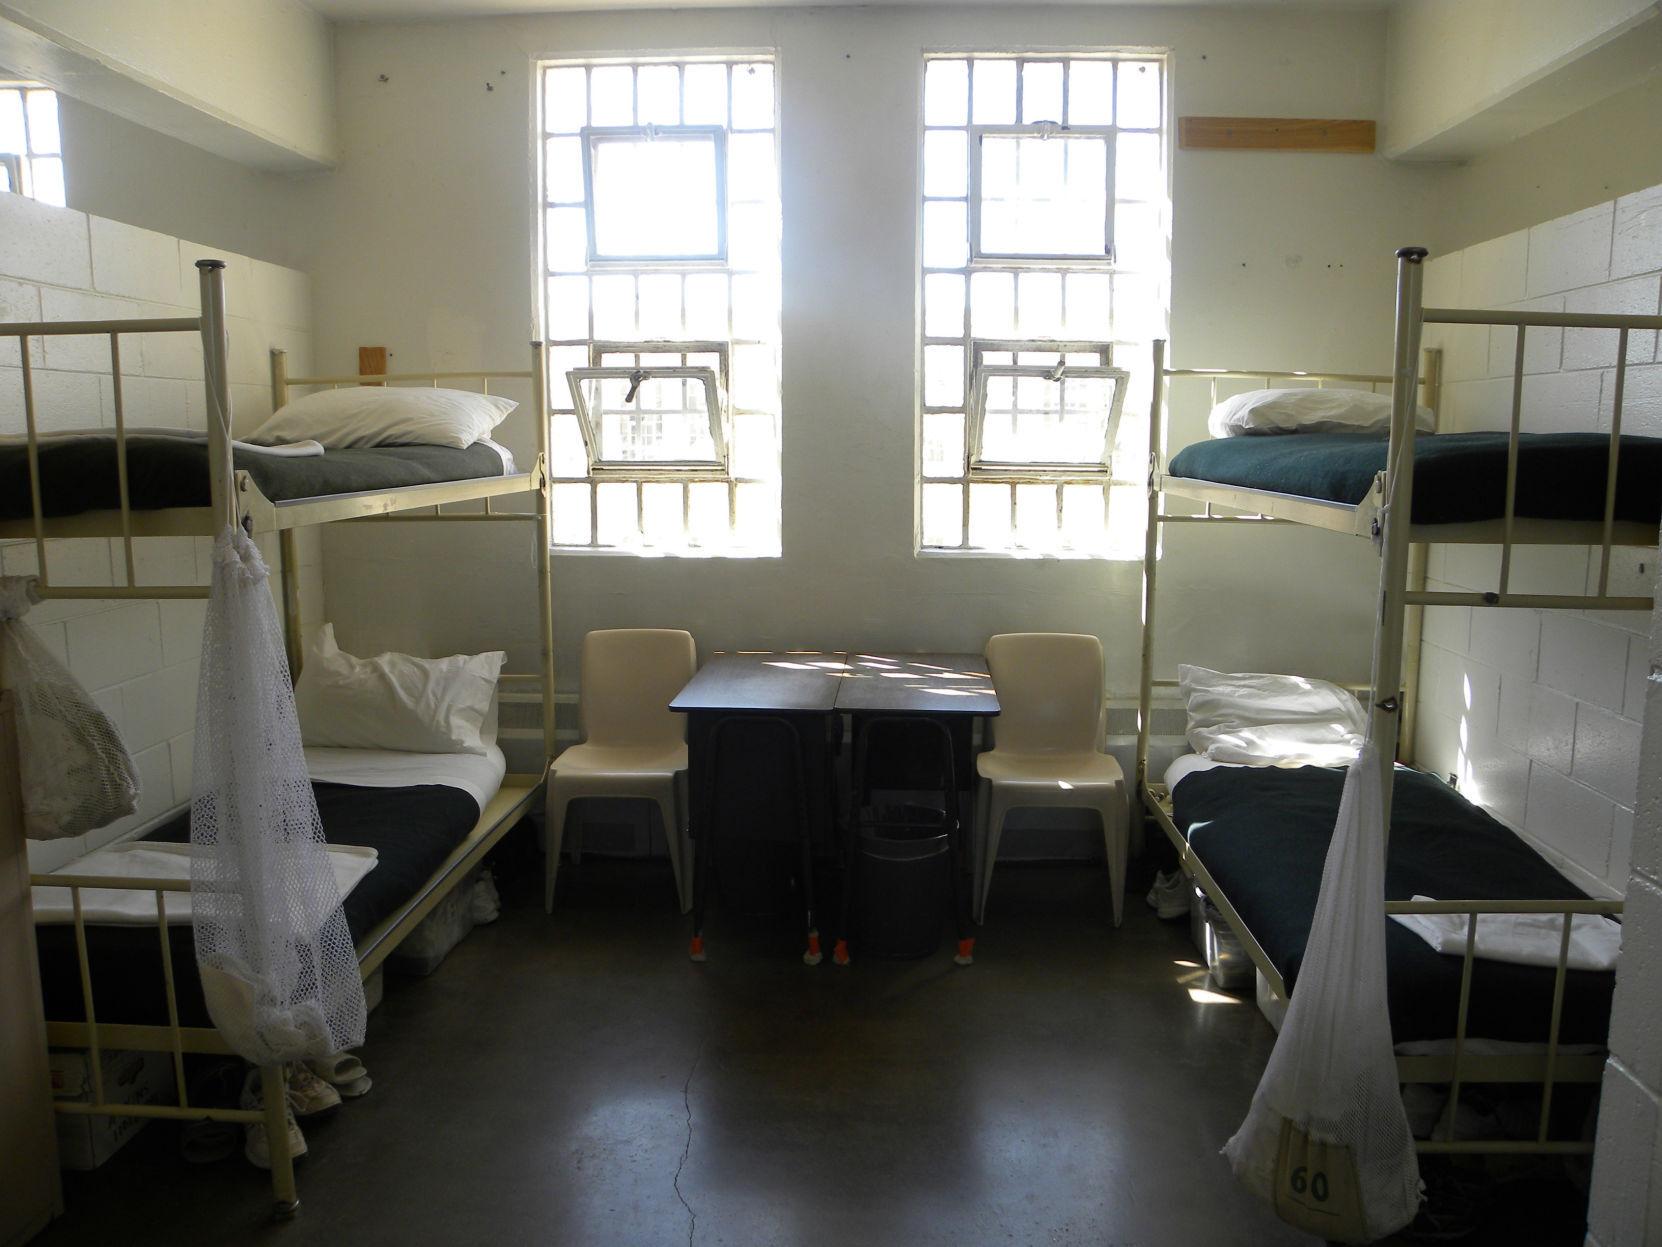 federal prison cell minimum security